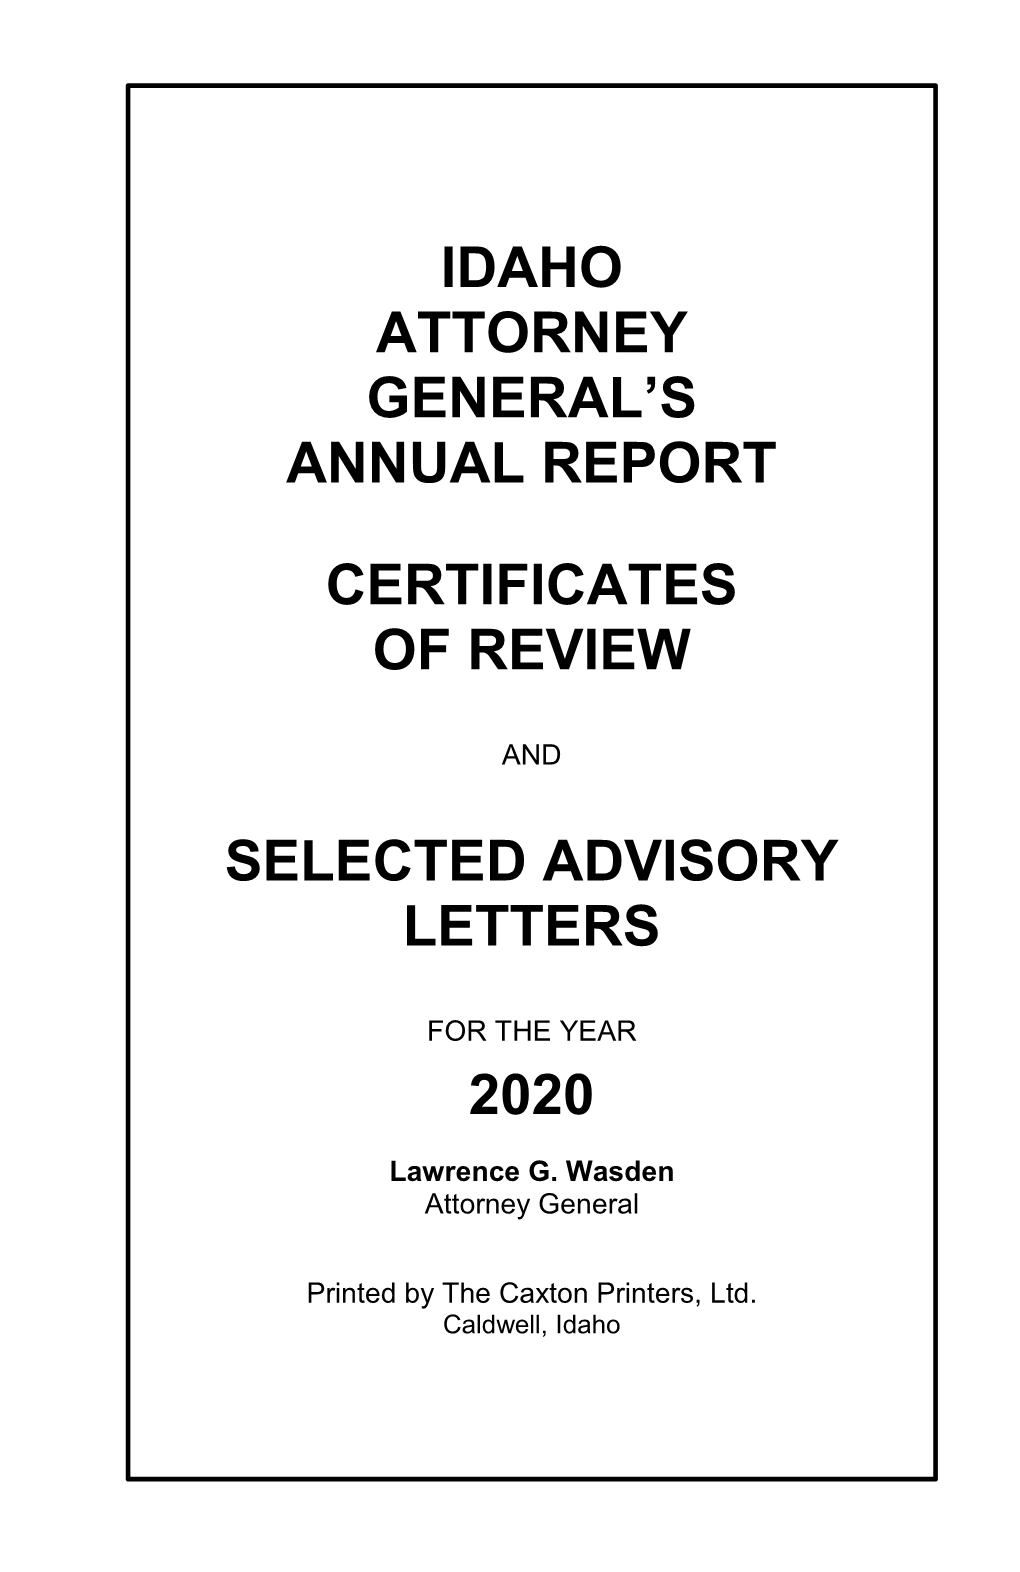 Idaho Attorney General's Annual Report Certificates of Review